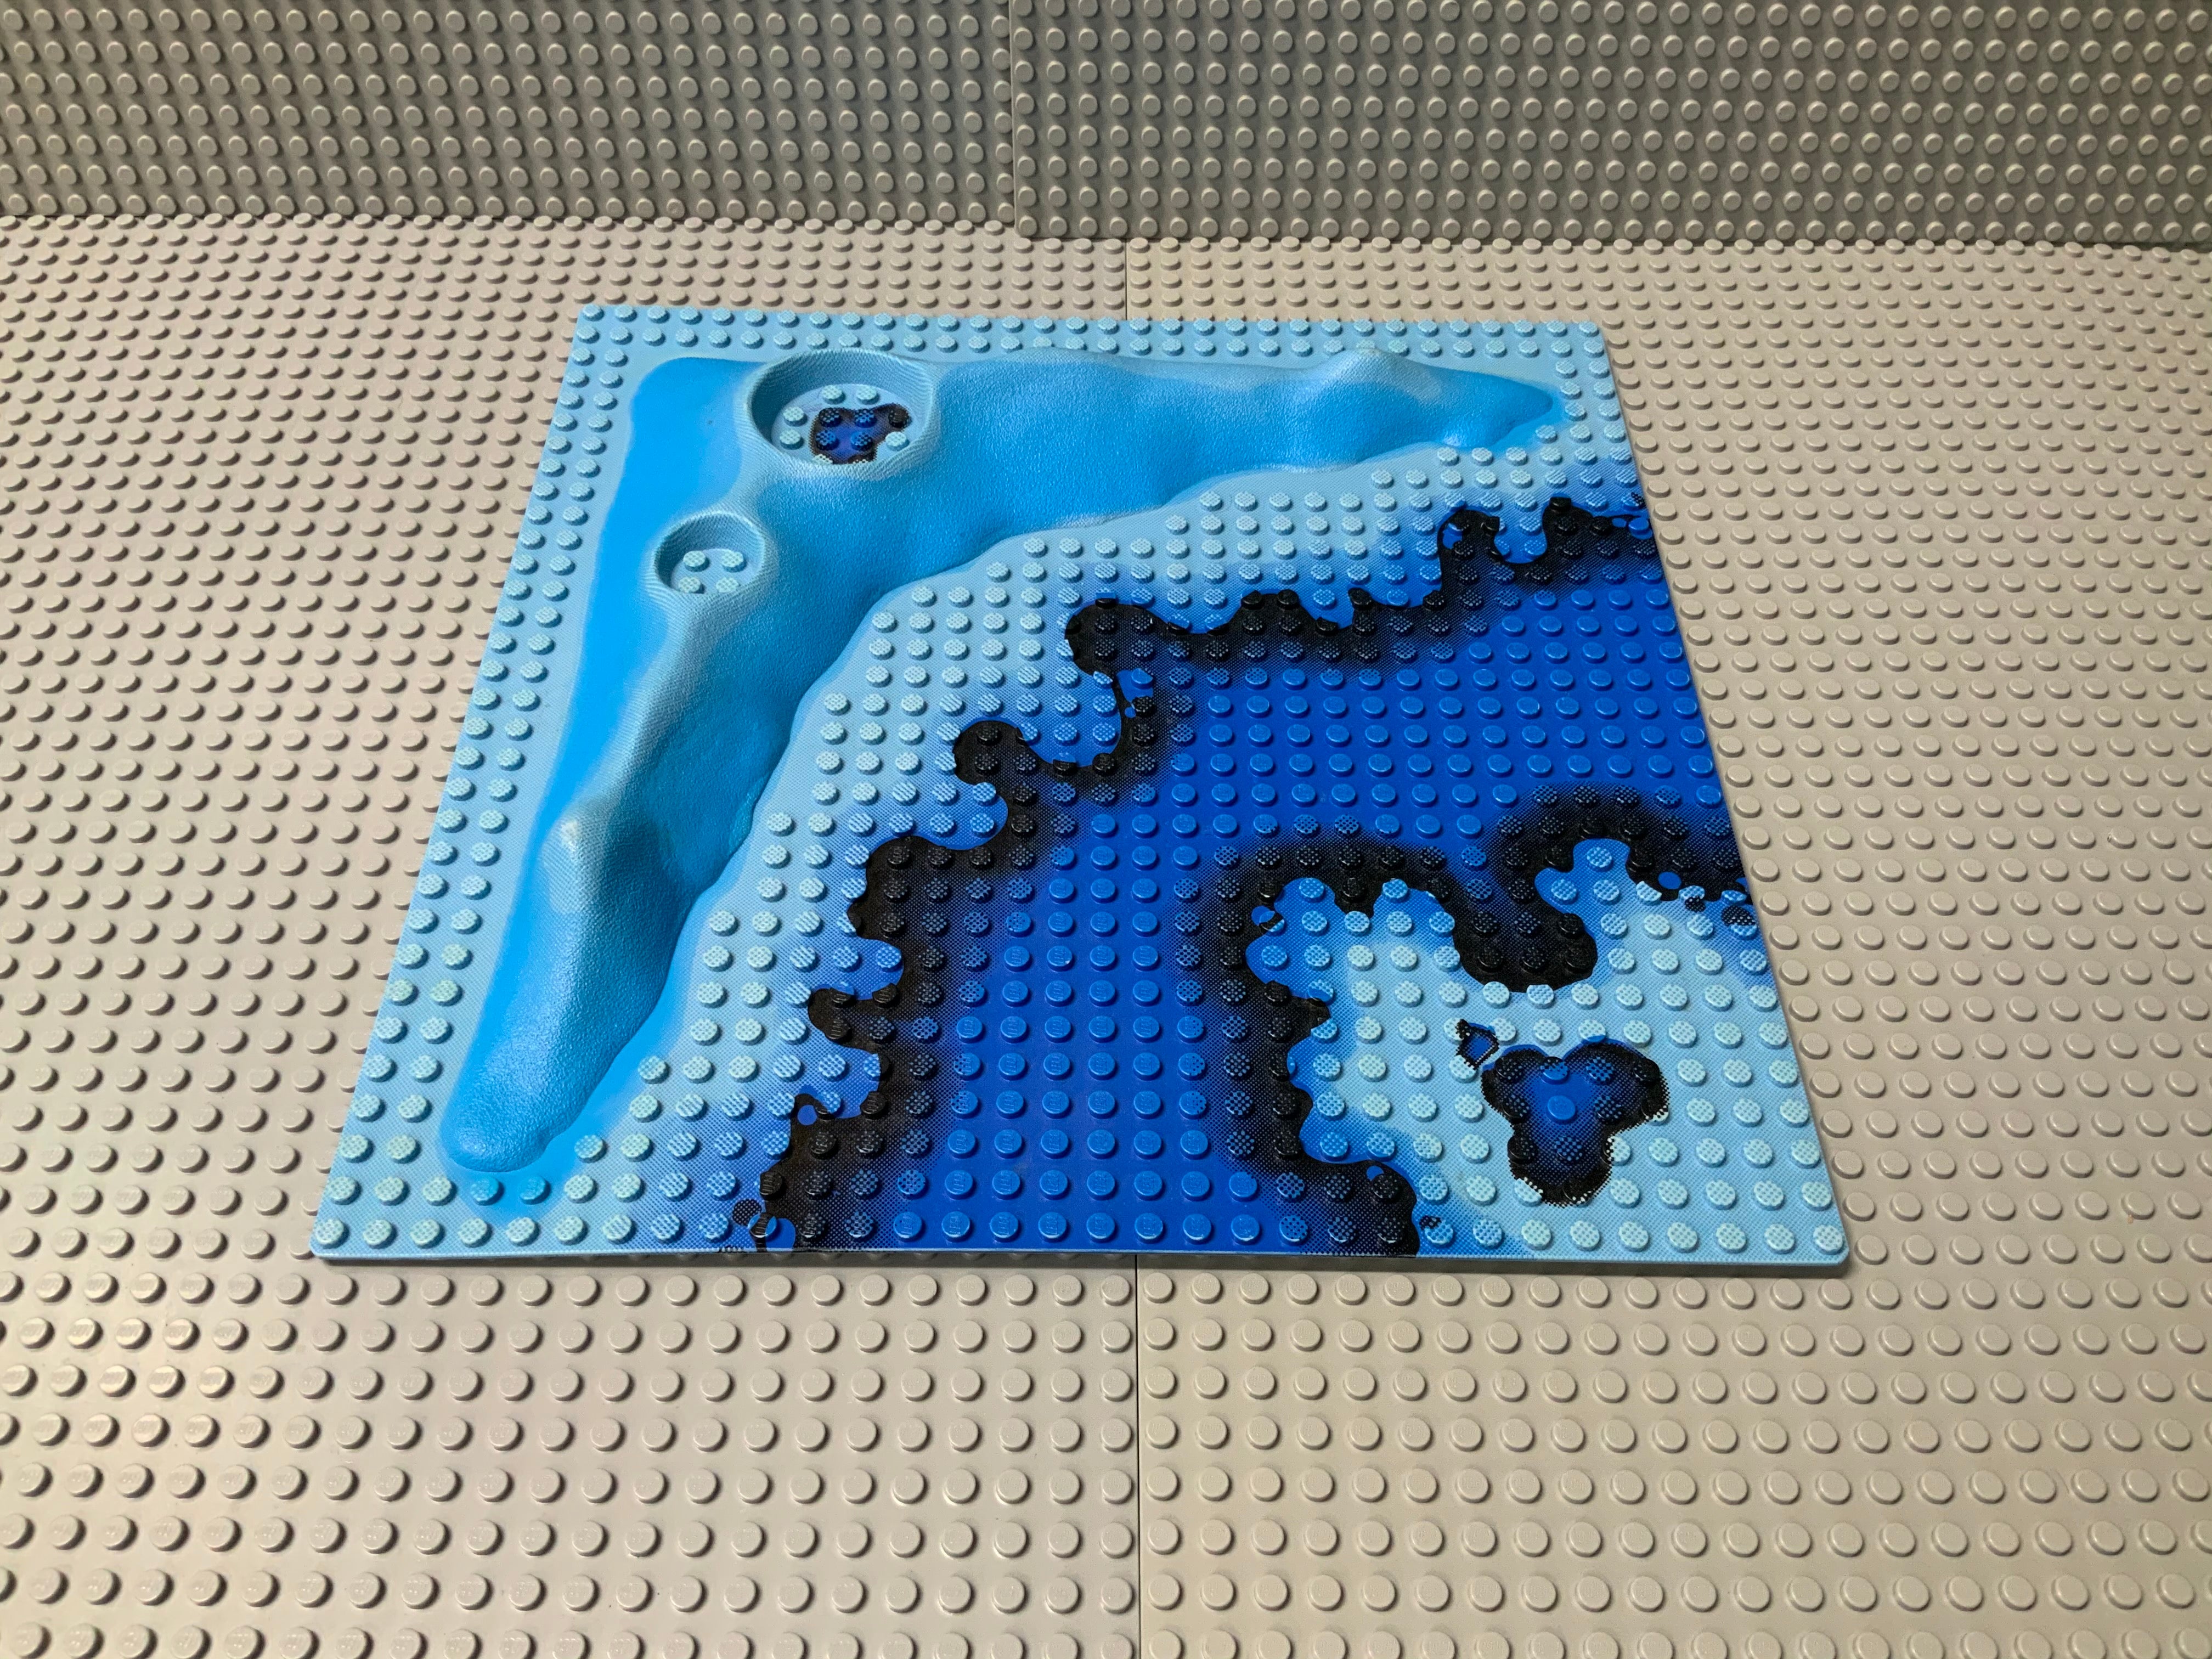 lego crater plates